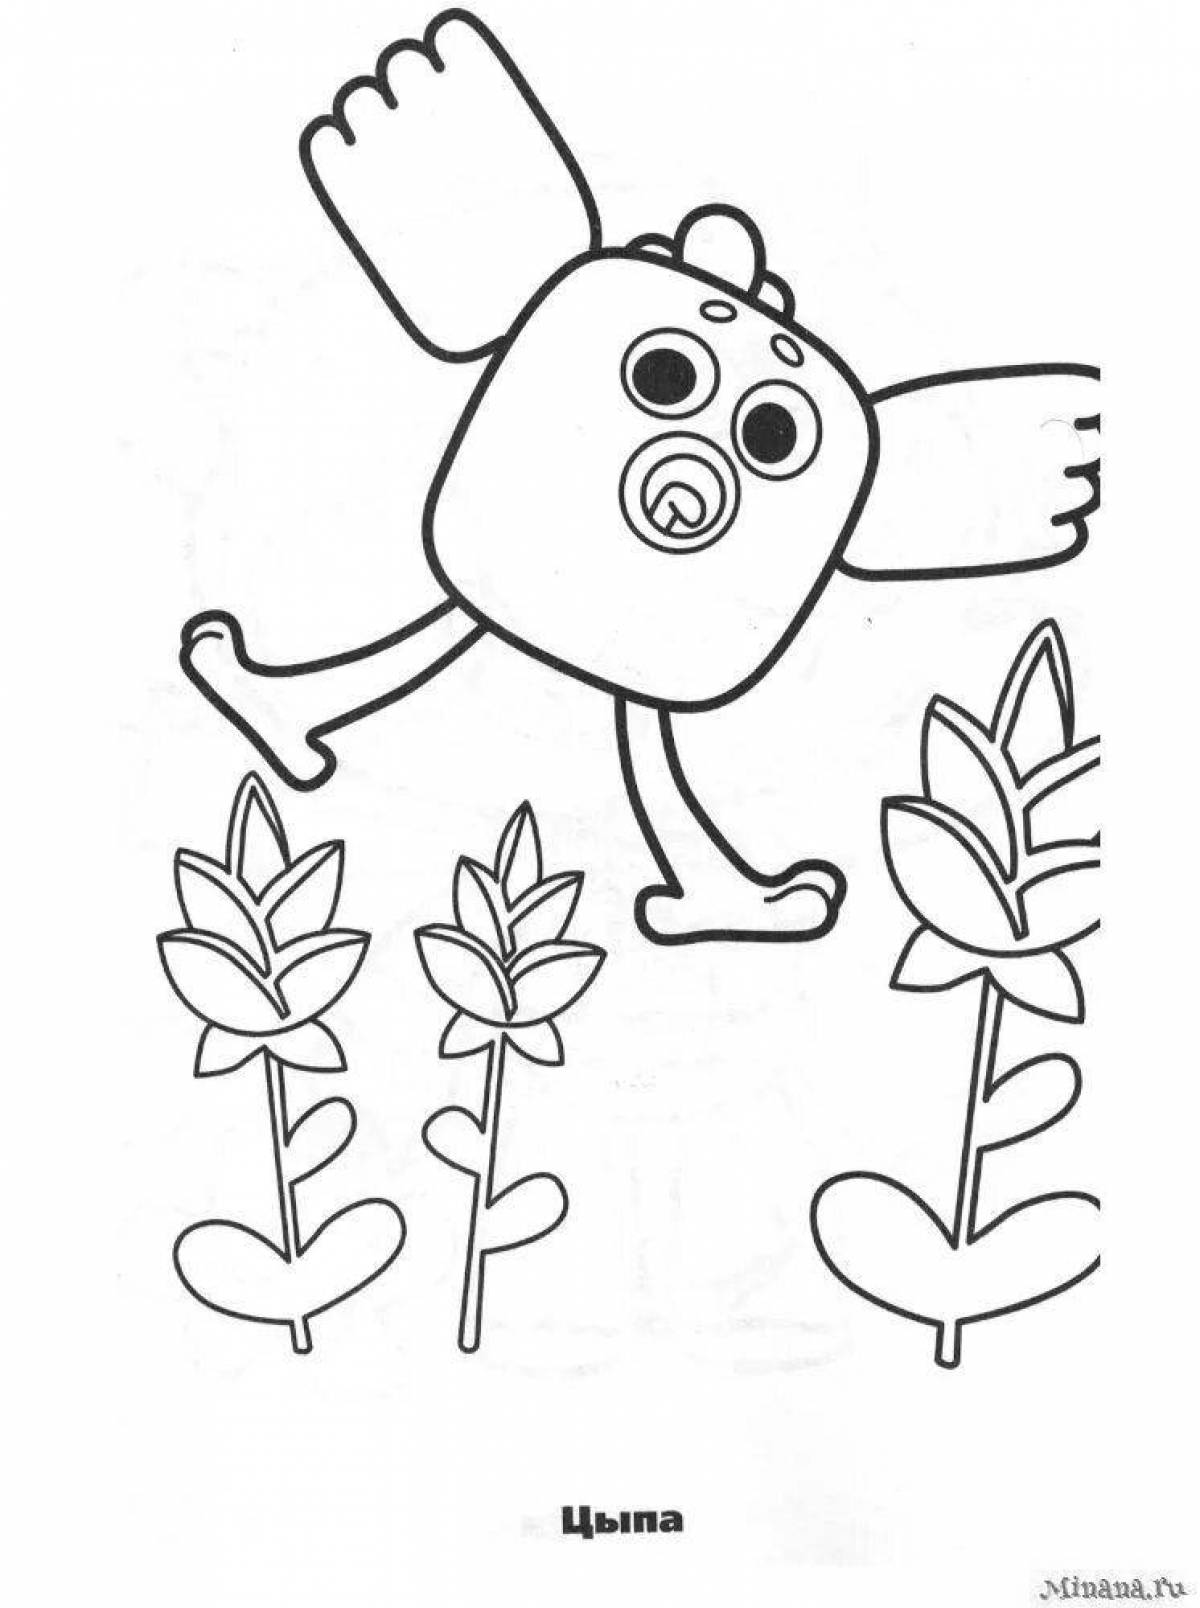 Colorful cute chick coloring page